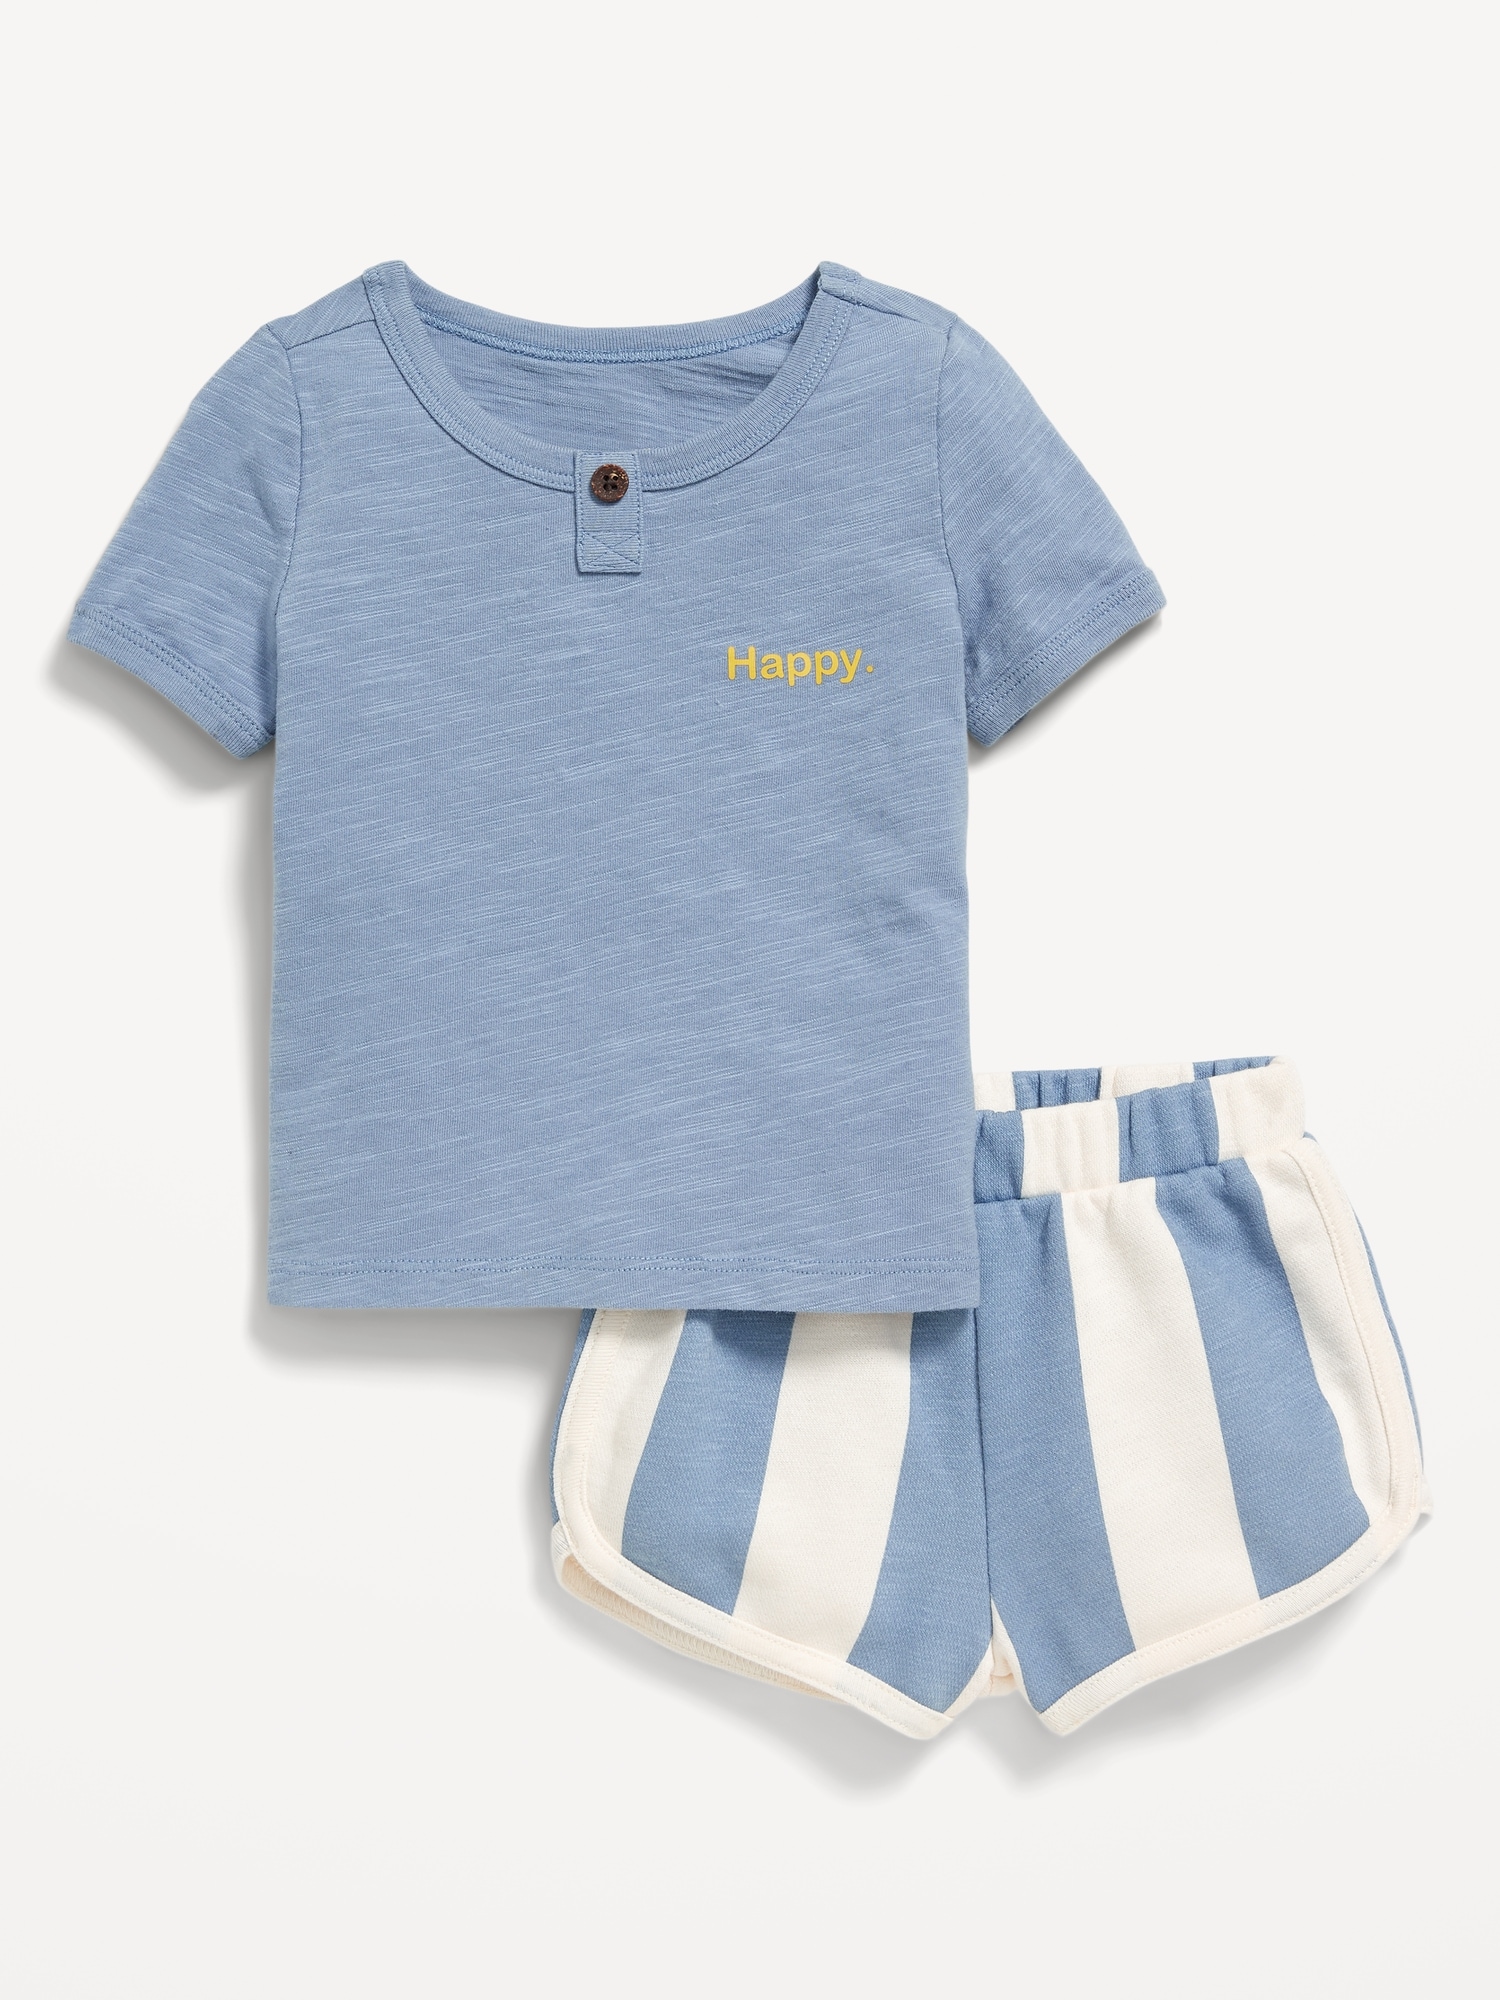 Little Navy Organic-Cotton T-Shirt and Shorts Set for Baby